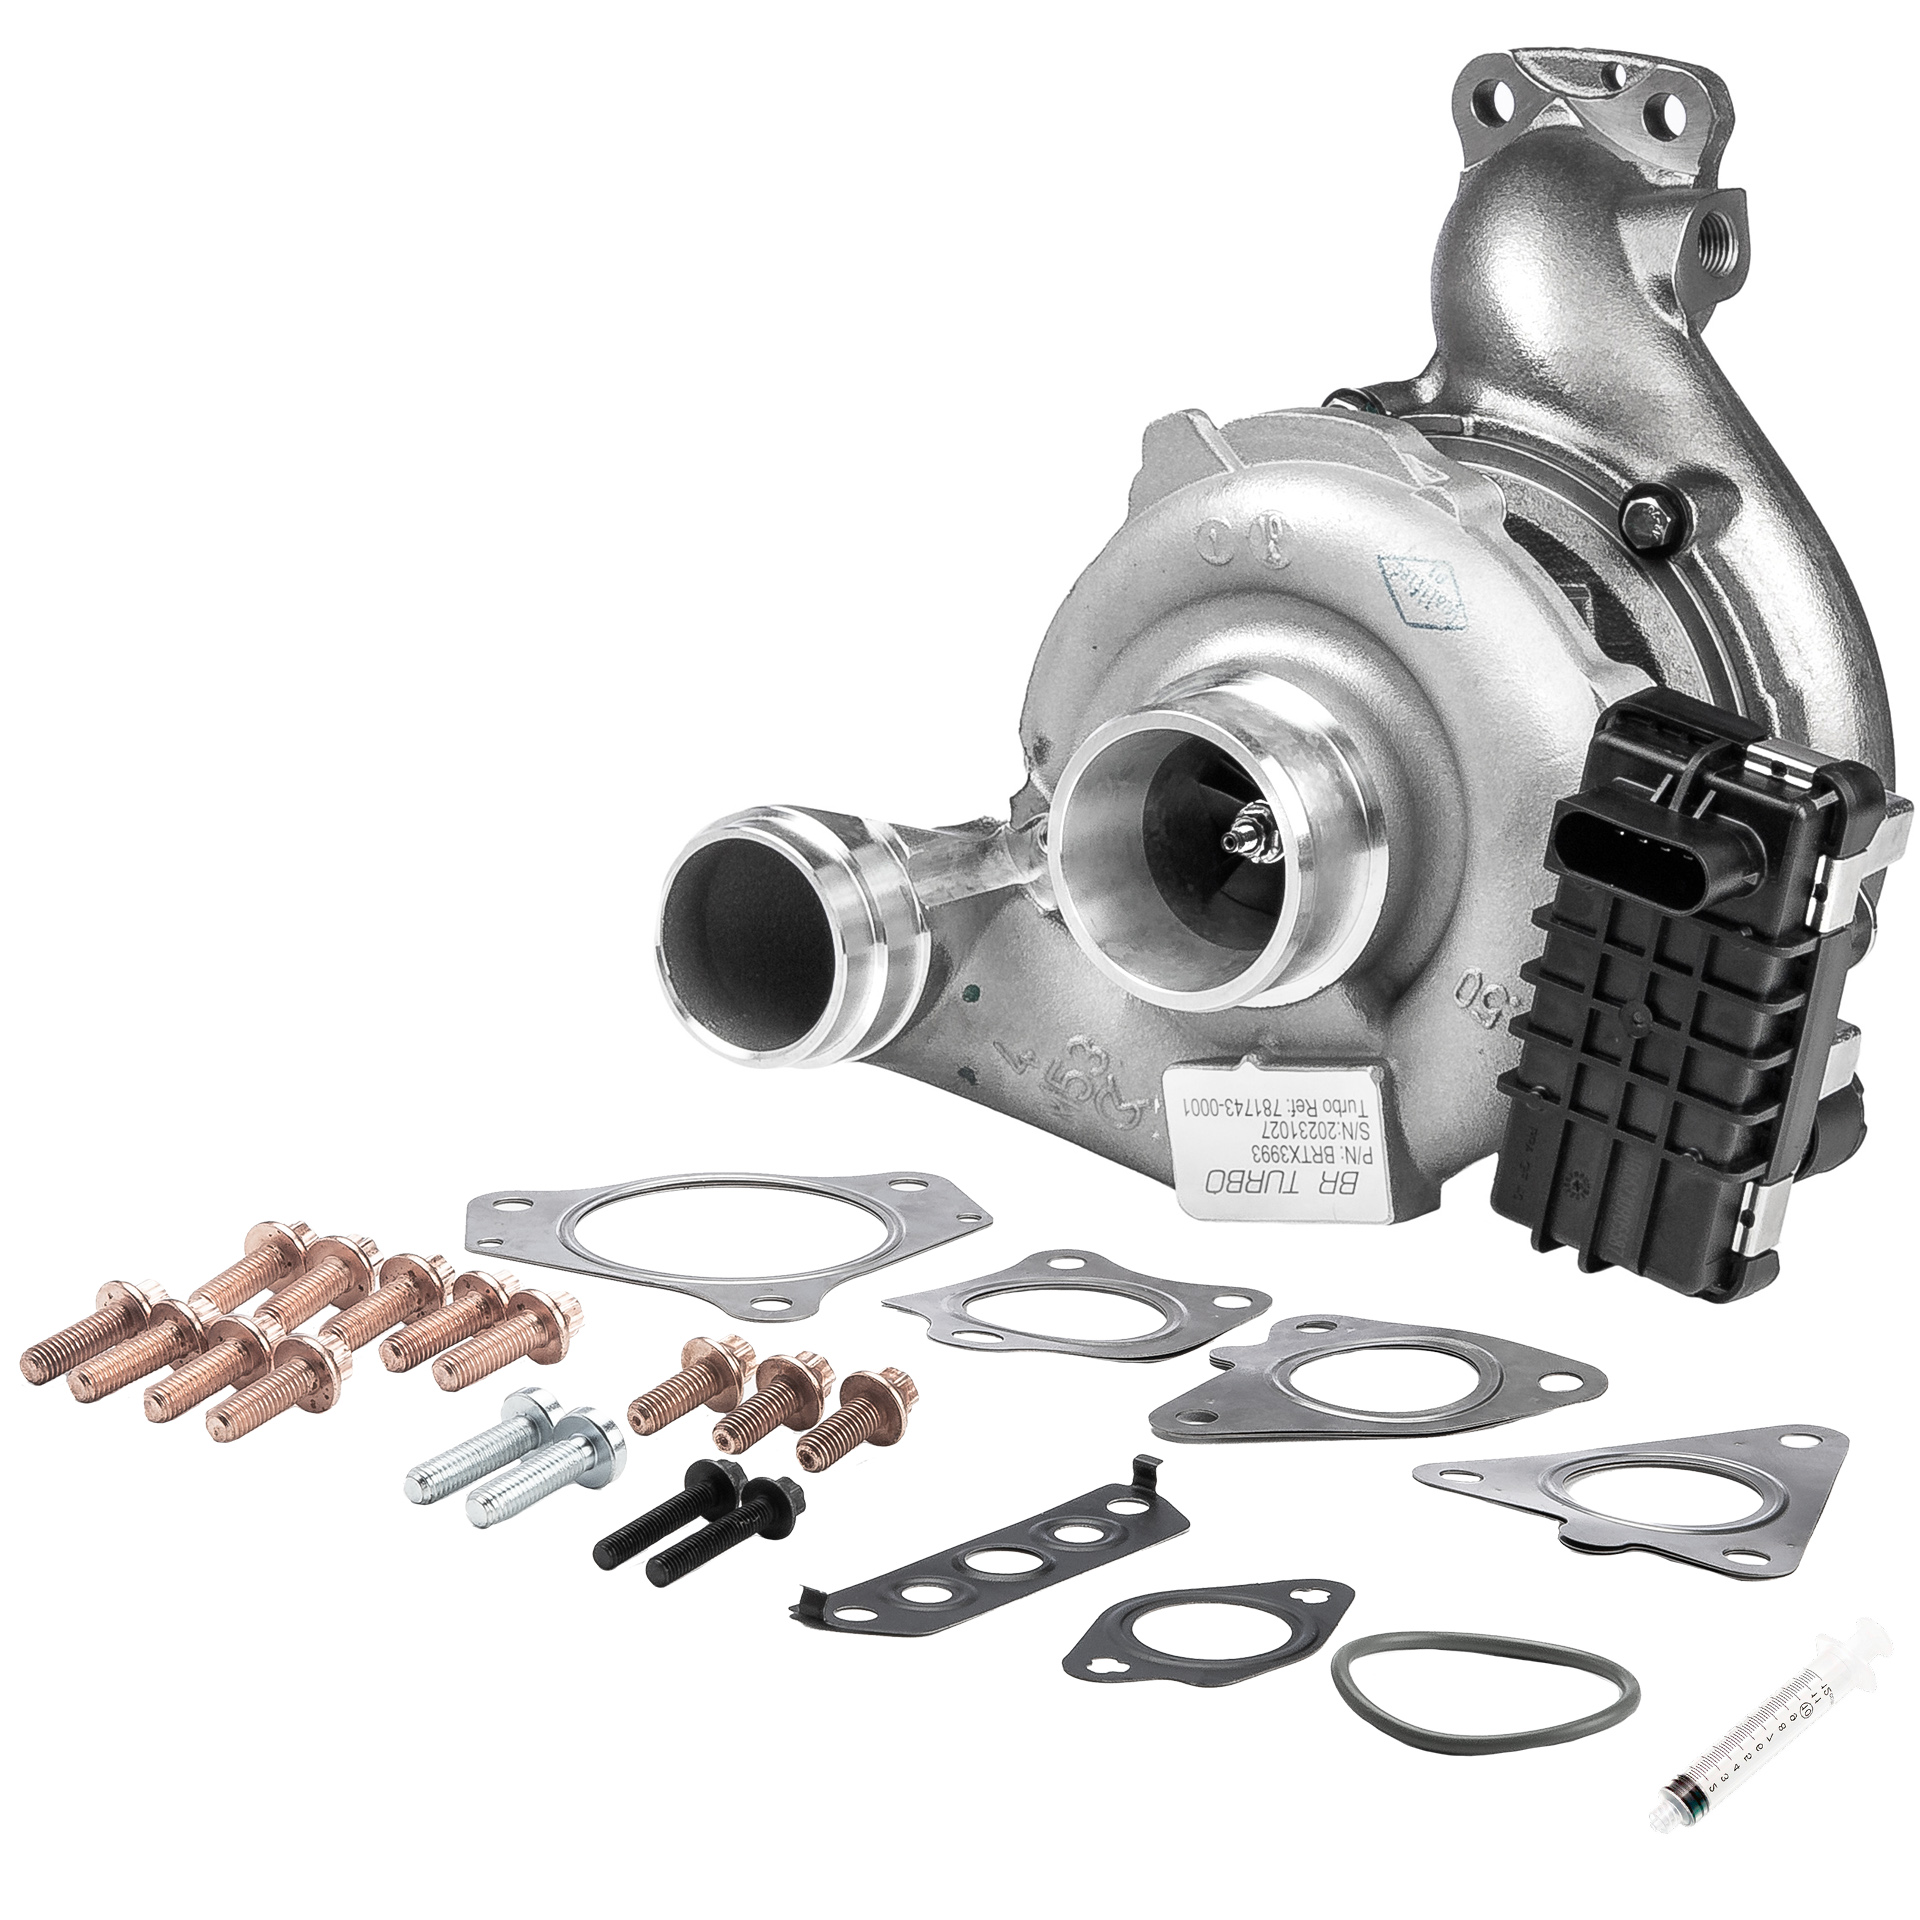 BR Turbo Turbo, with attachment material Turbo BRTX3993M buy